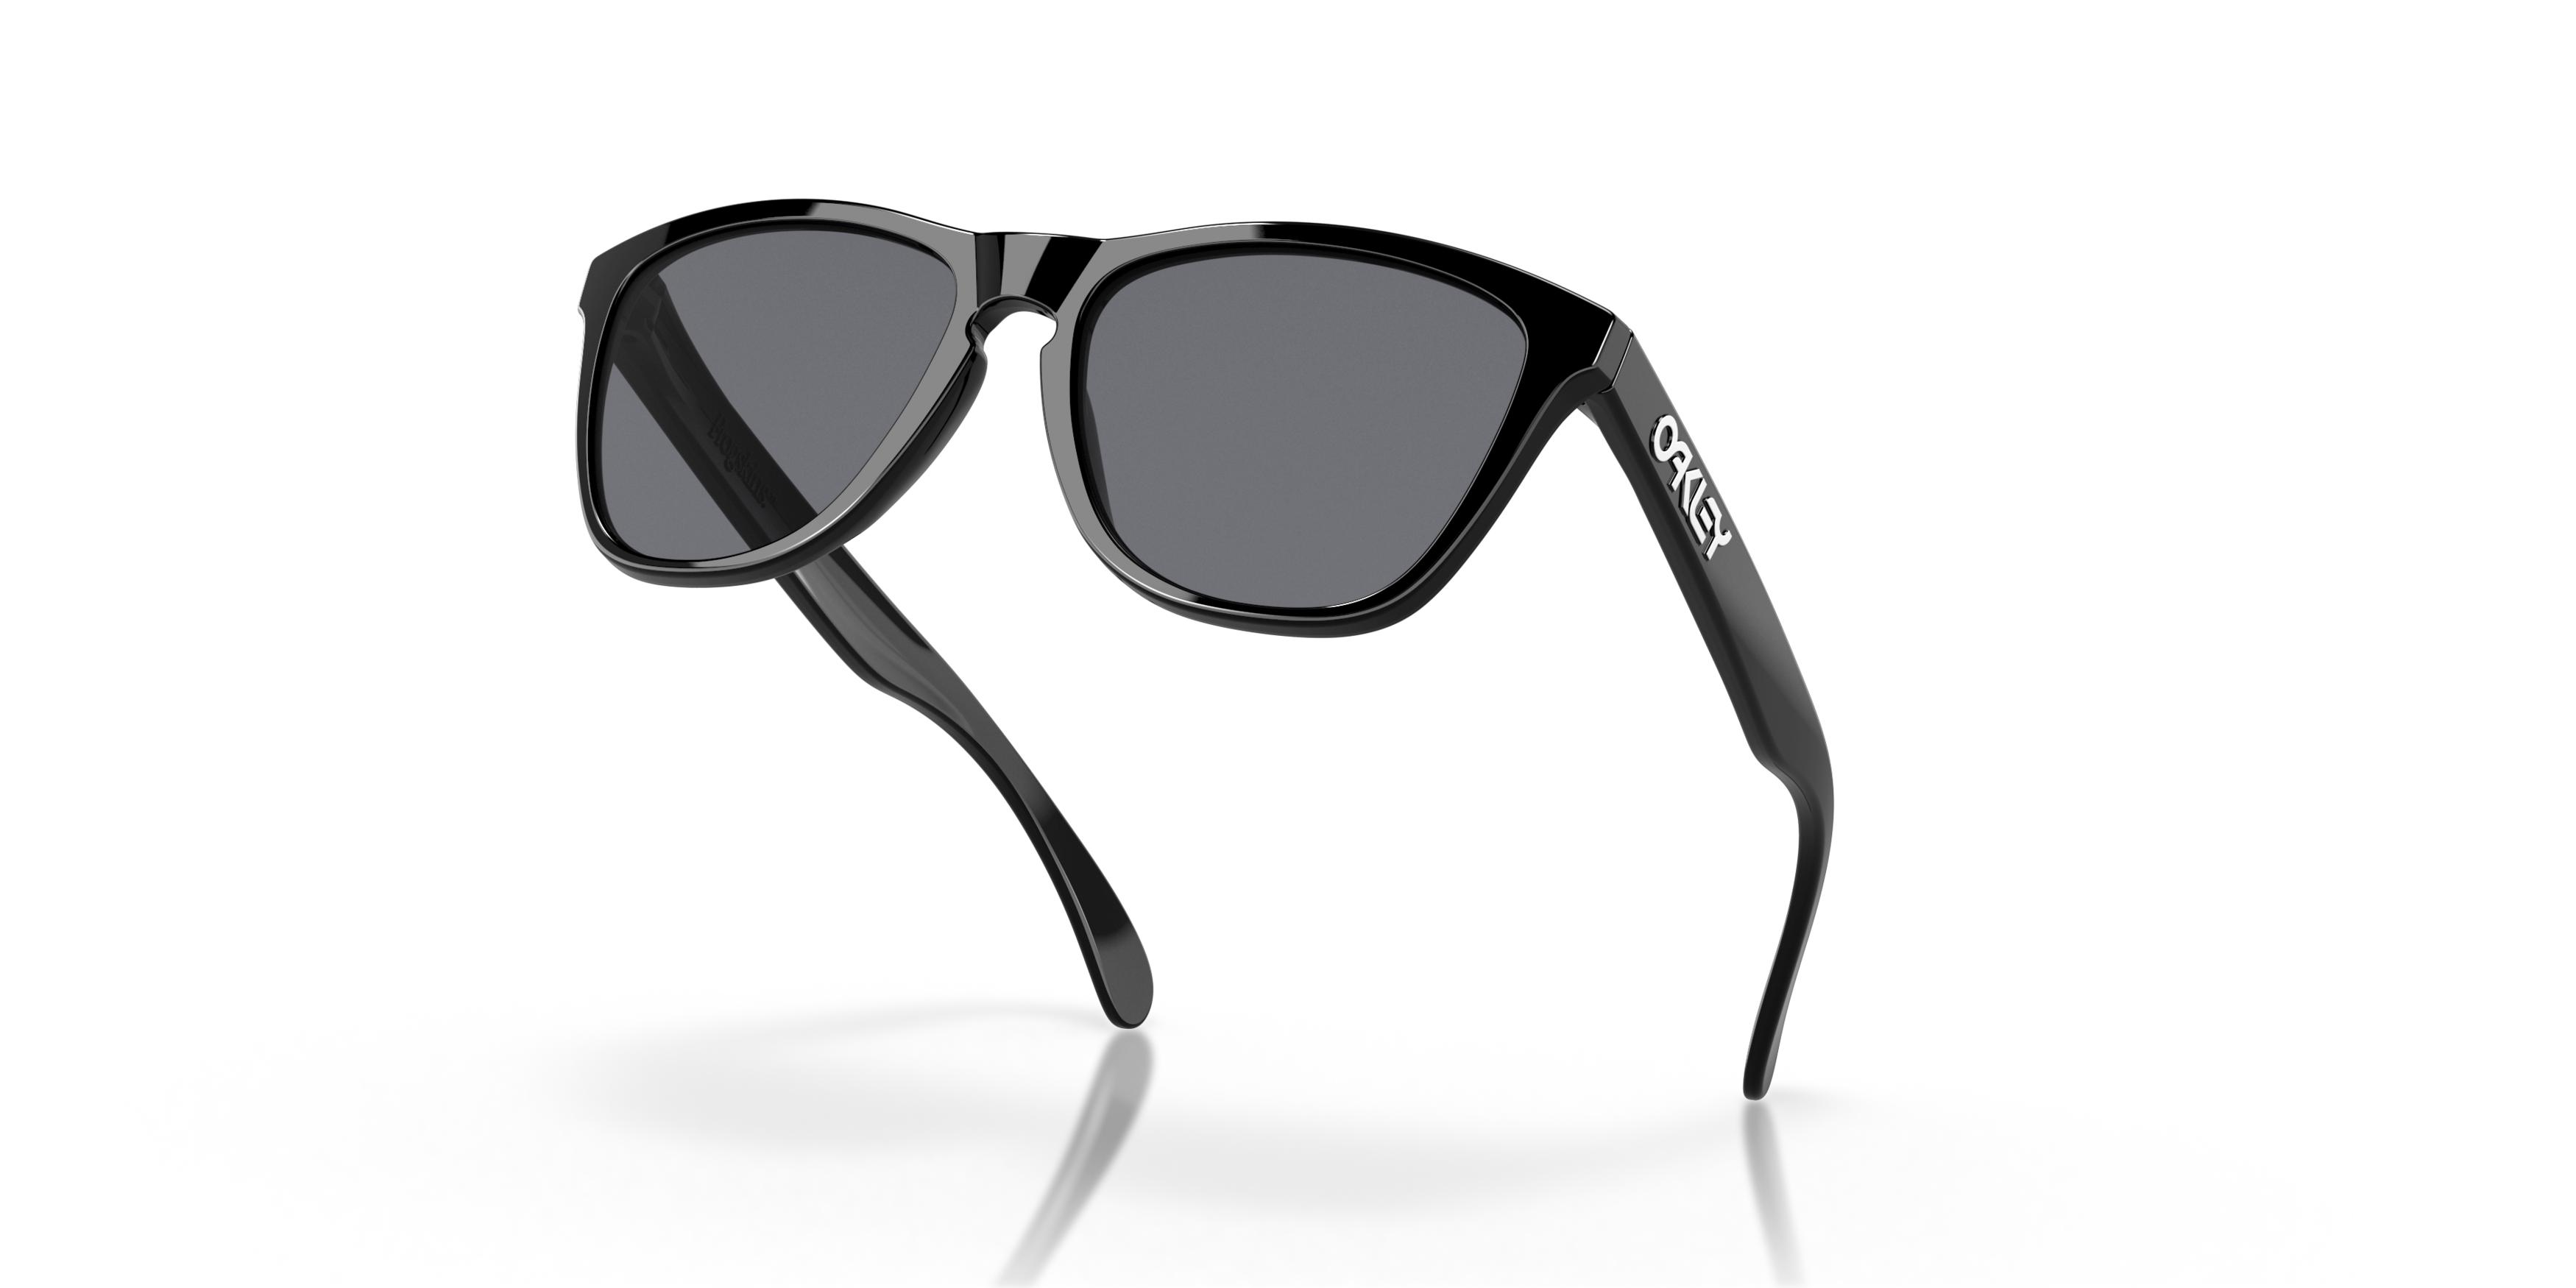 [products.image.bottom_up] Oakley